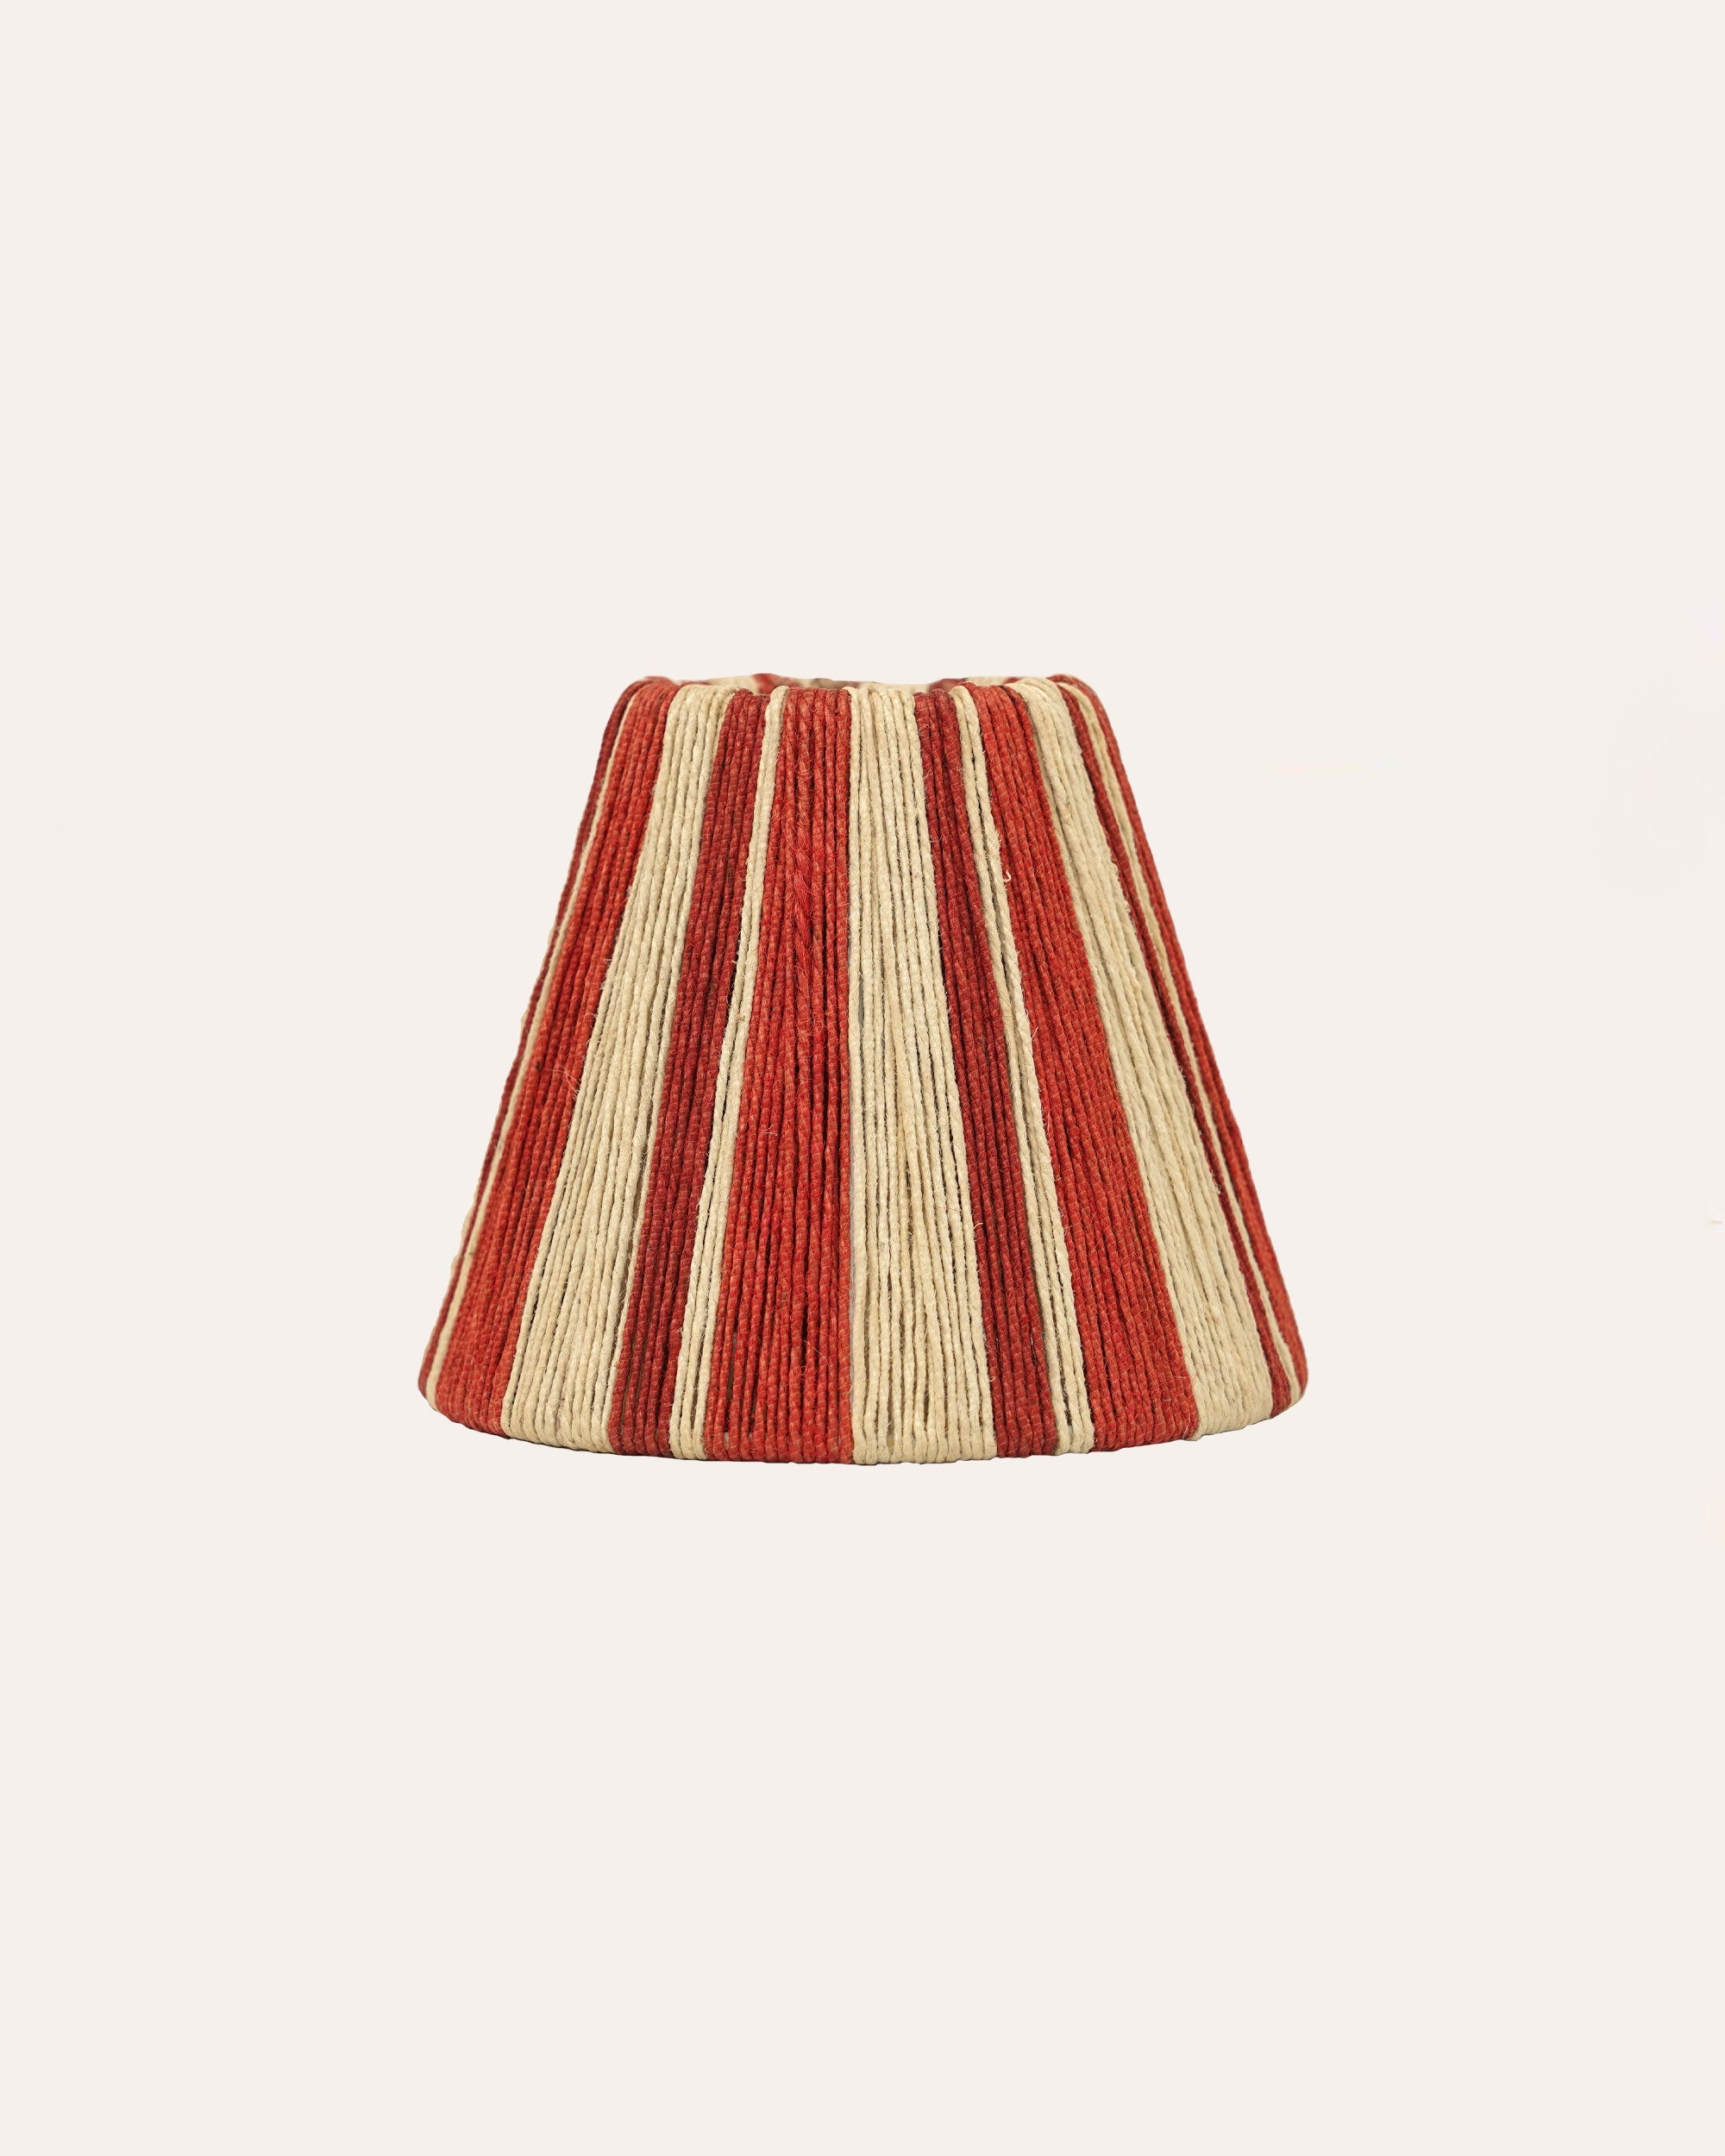 The Stripey String Candle Lampshade - The Red